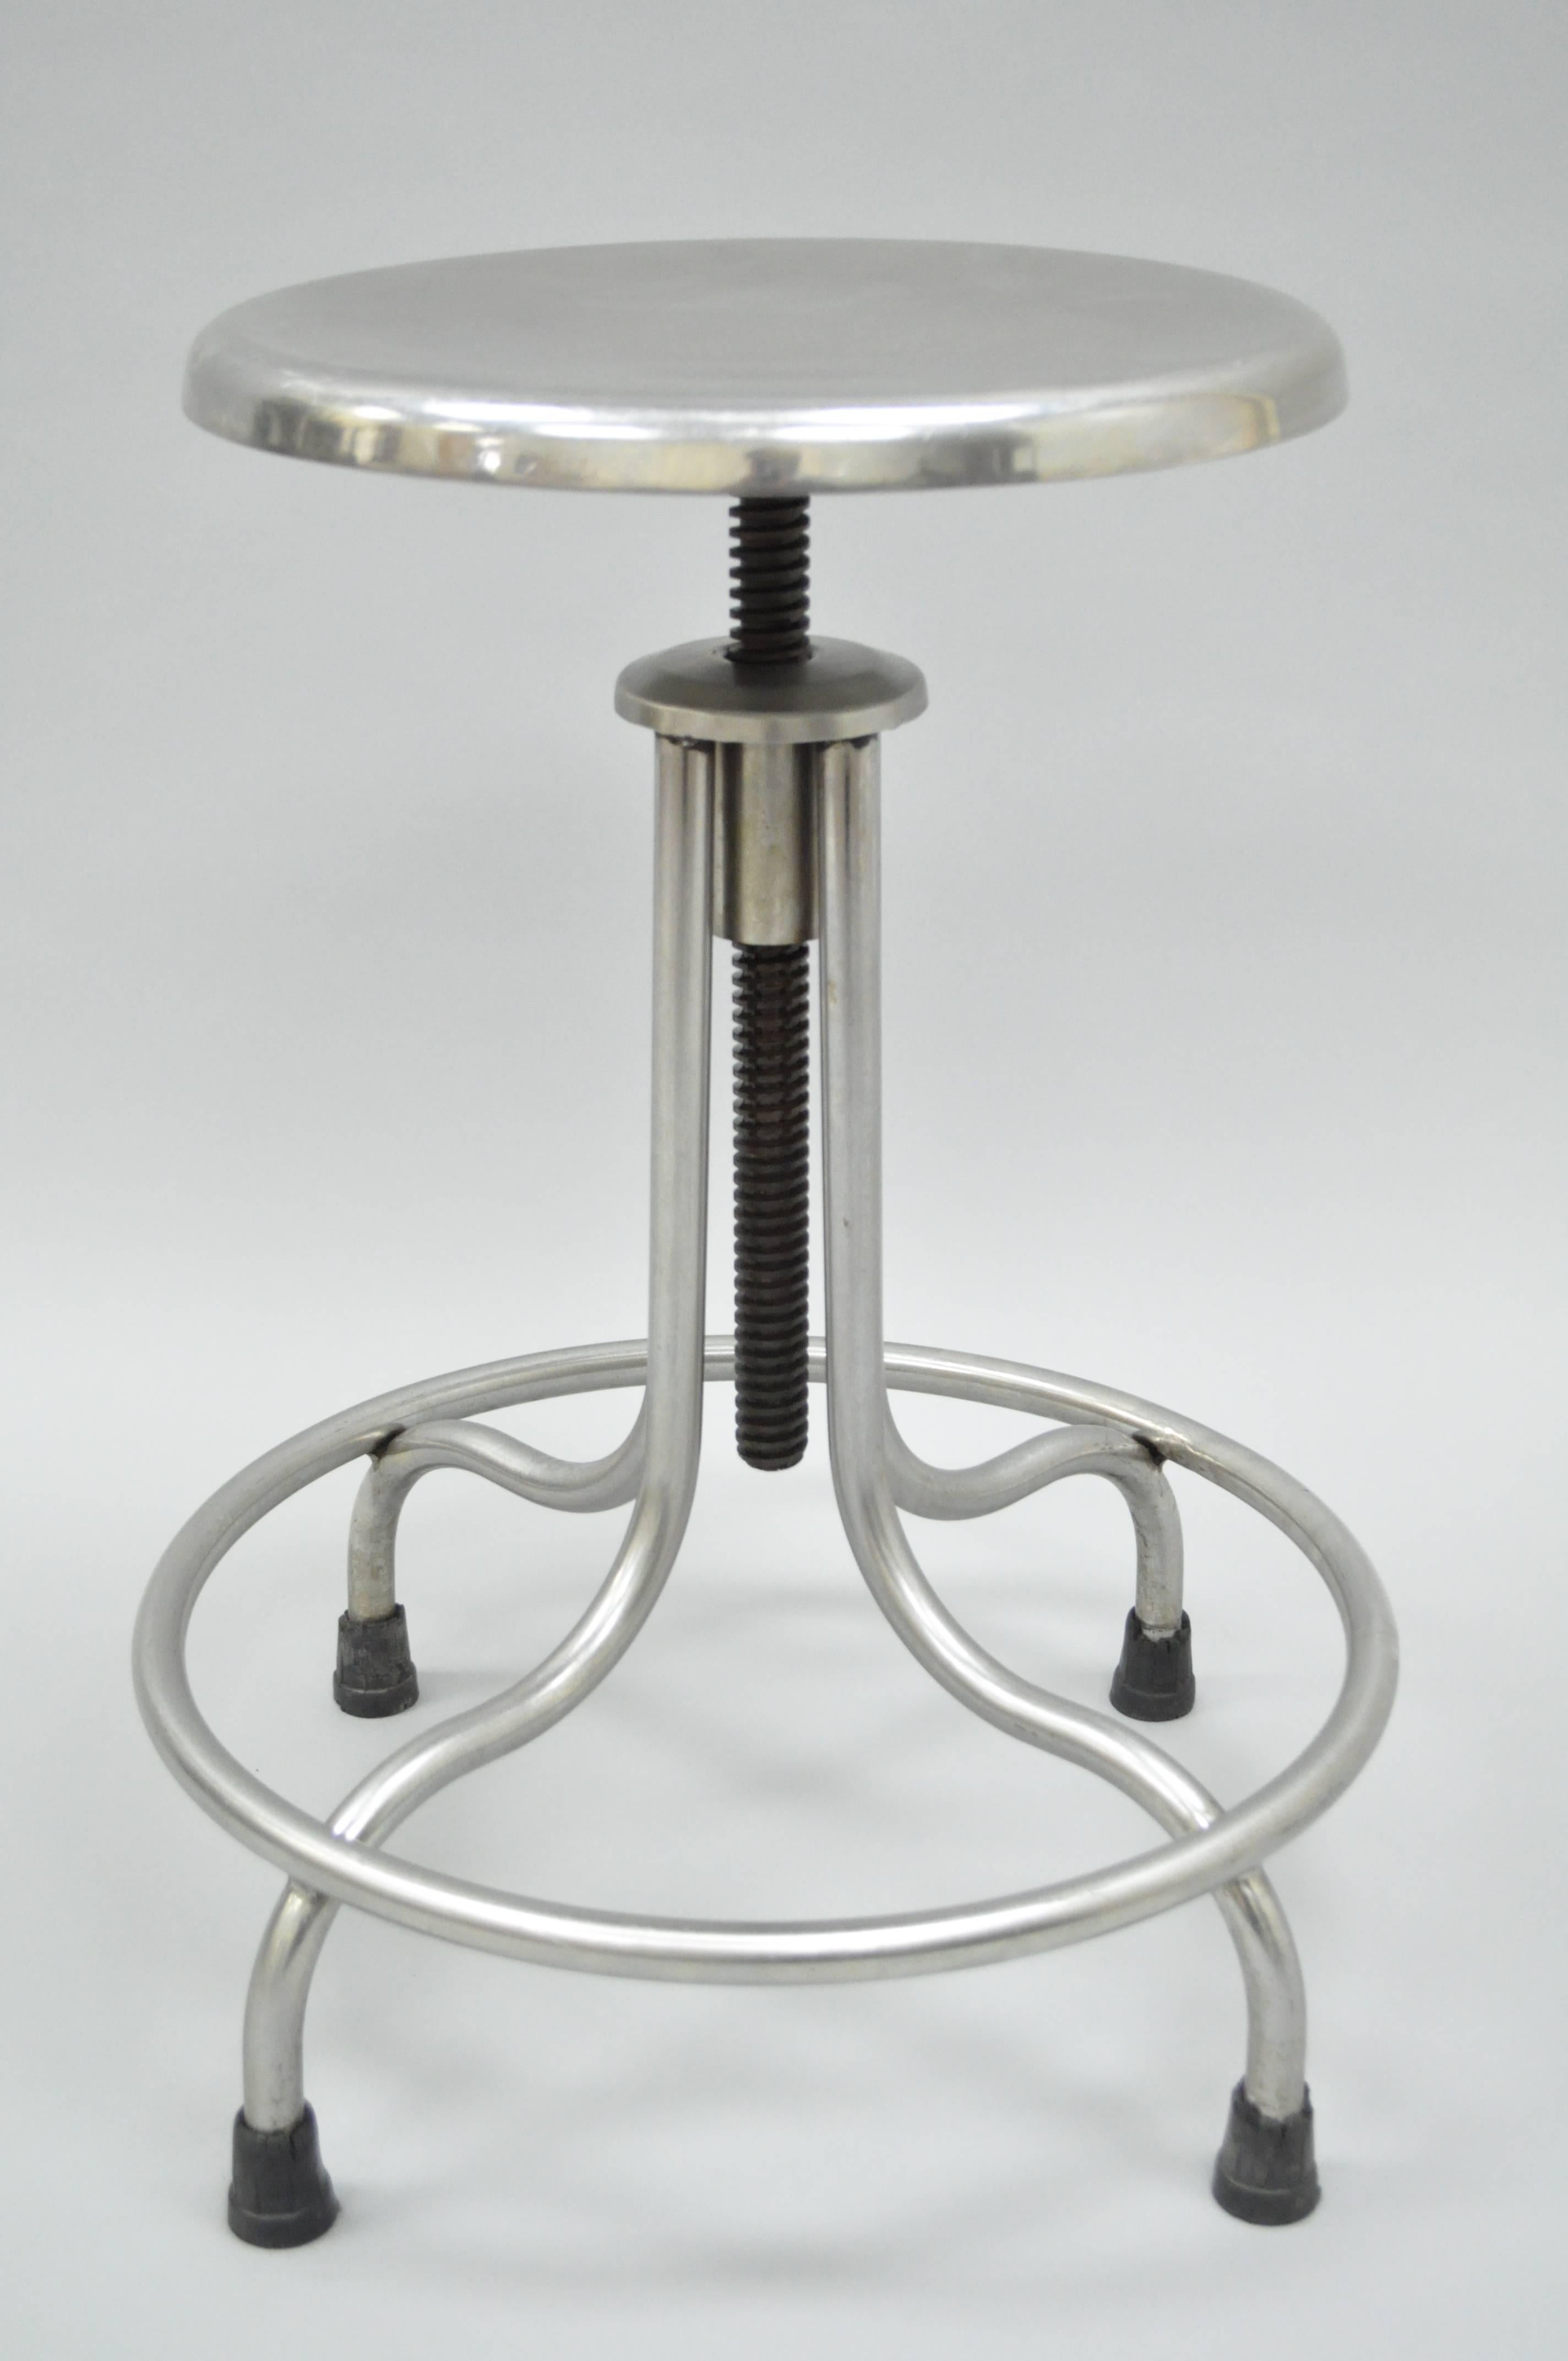 Set of eight original vintage stainless steel swivel adjustable height stools/bar stools with footrests by Atlantic Alloy Industries Inc. (AAI) of Union, New Jersey. These well-constructed American made medical or dental stools feature a polished